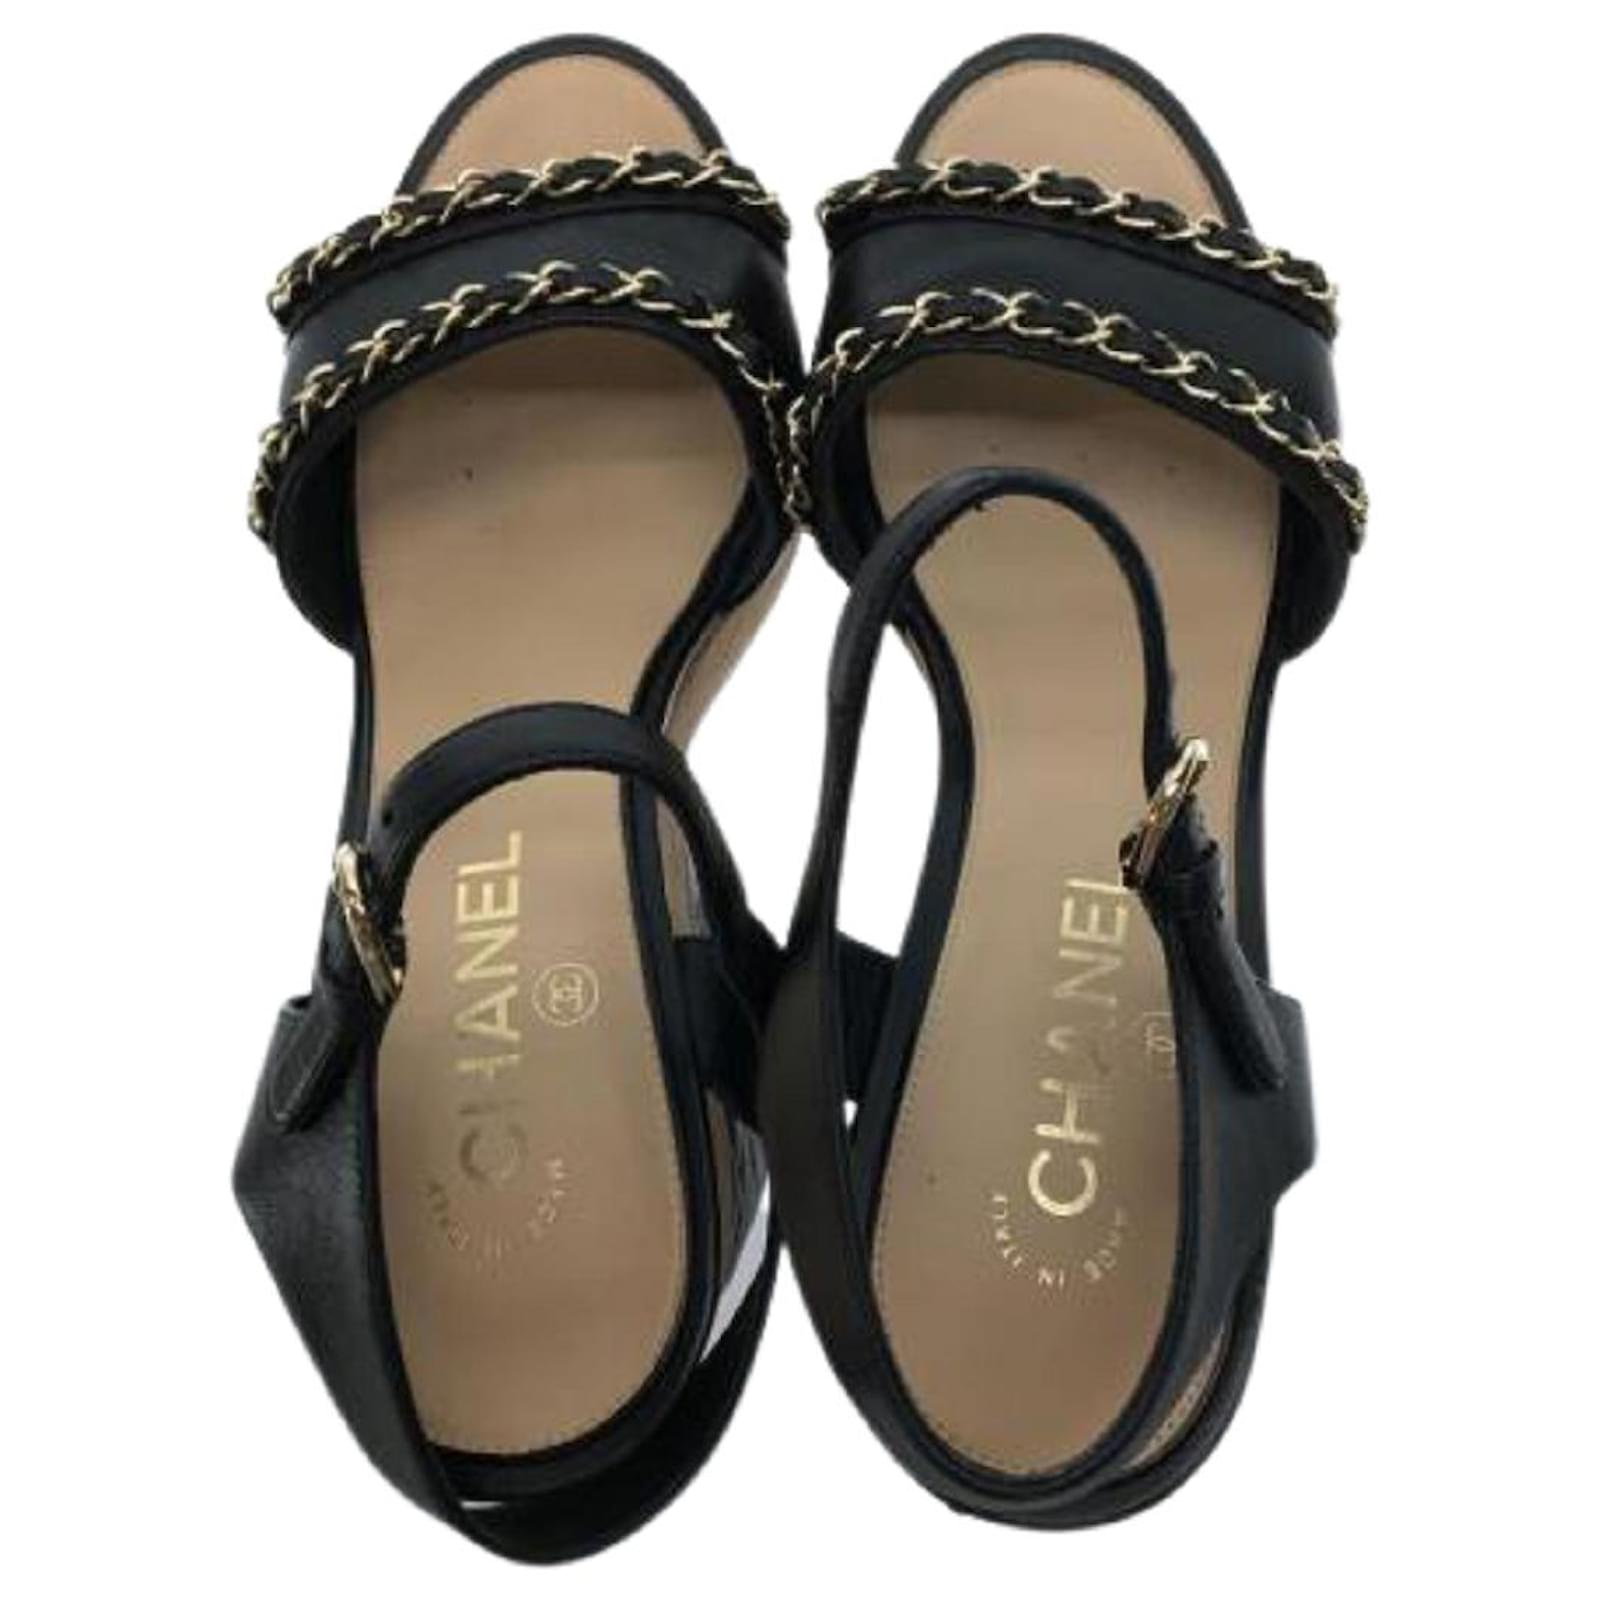 Used] CHANEL Coco Mark Matrasse / Wedge Sandals / Quilted Chain